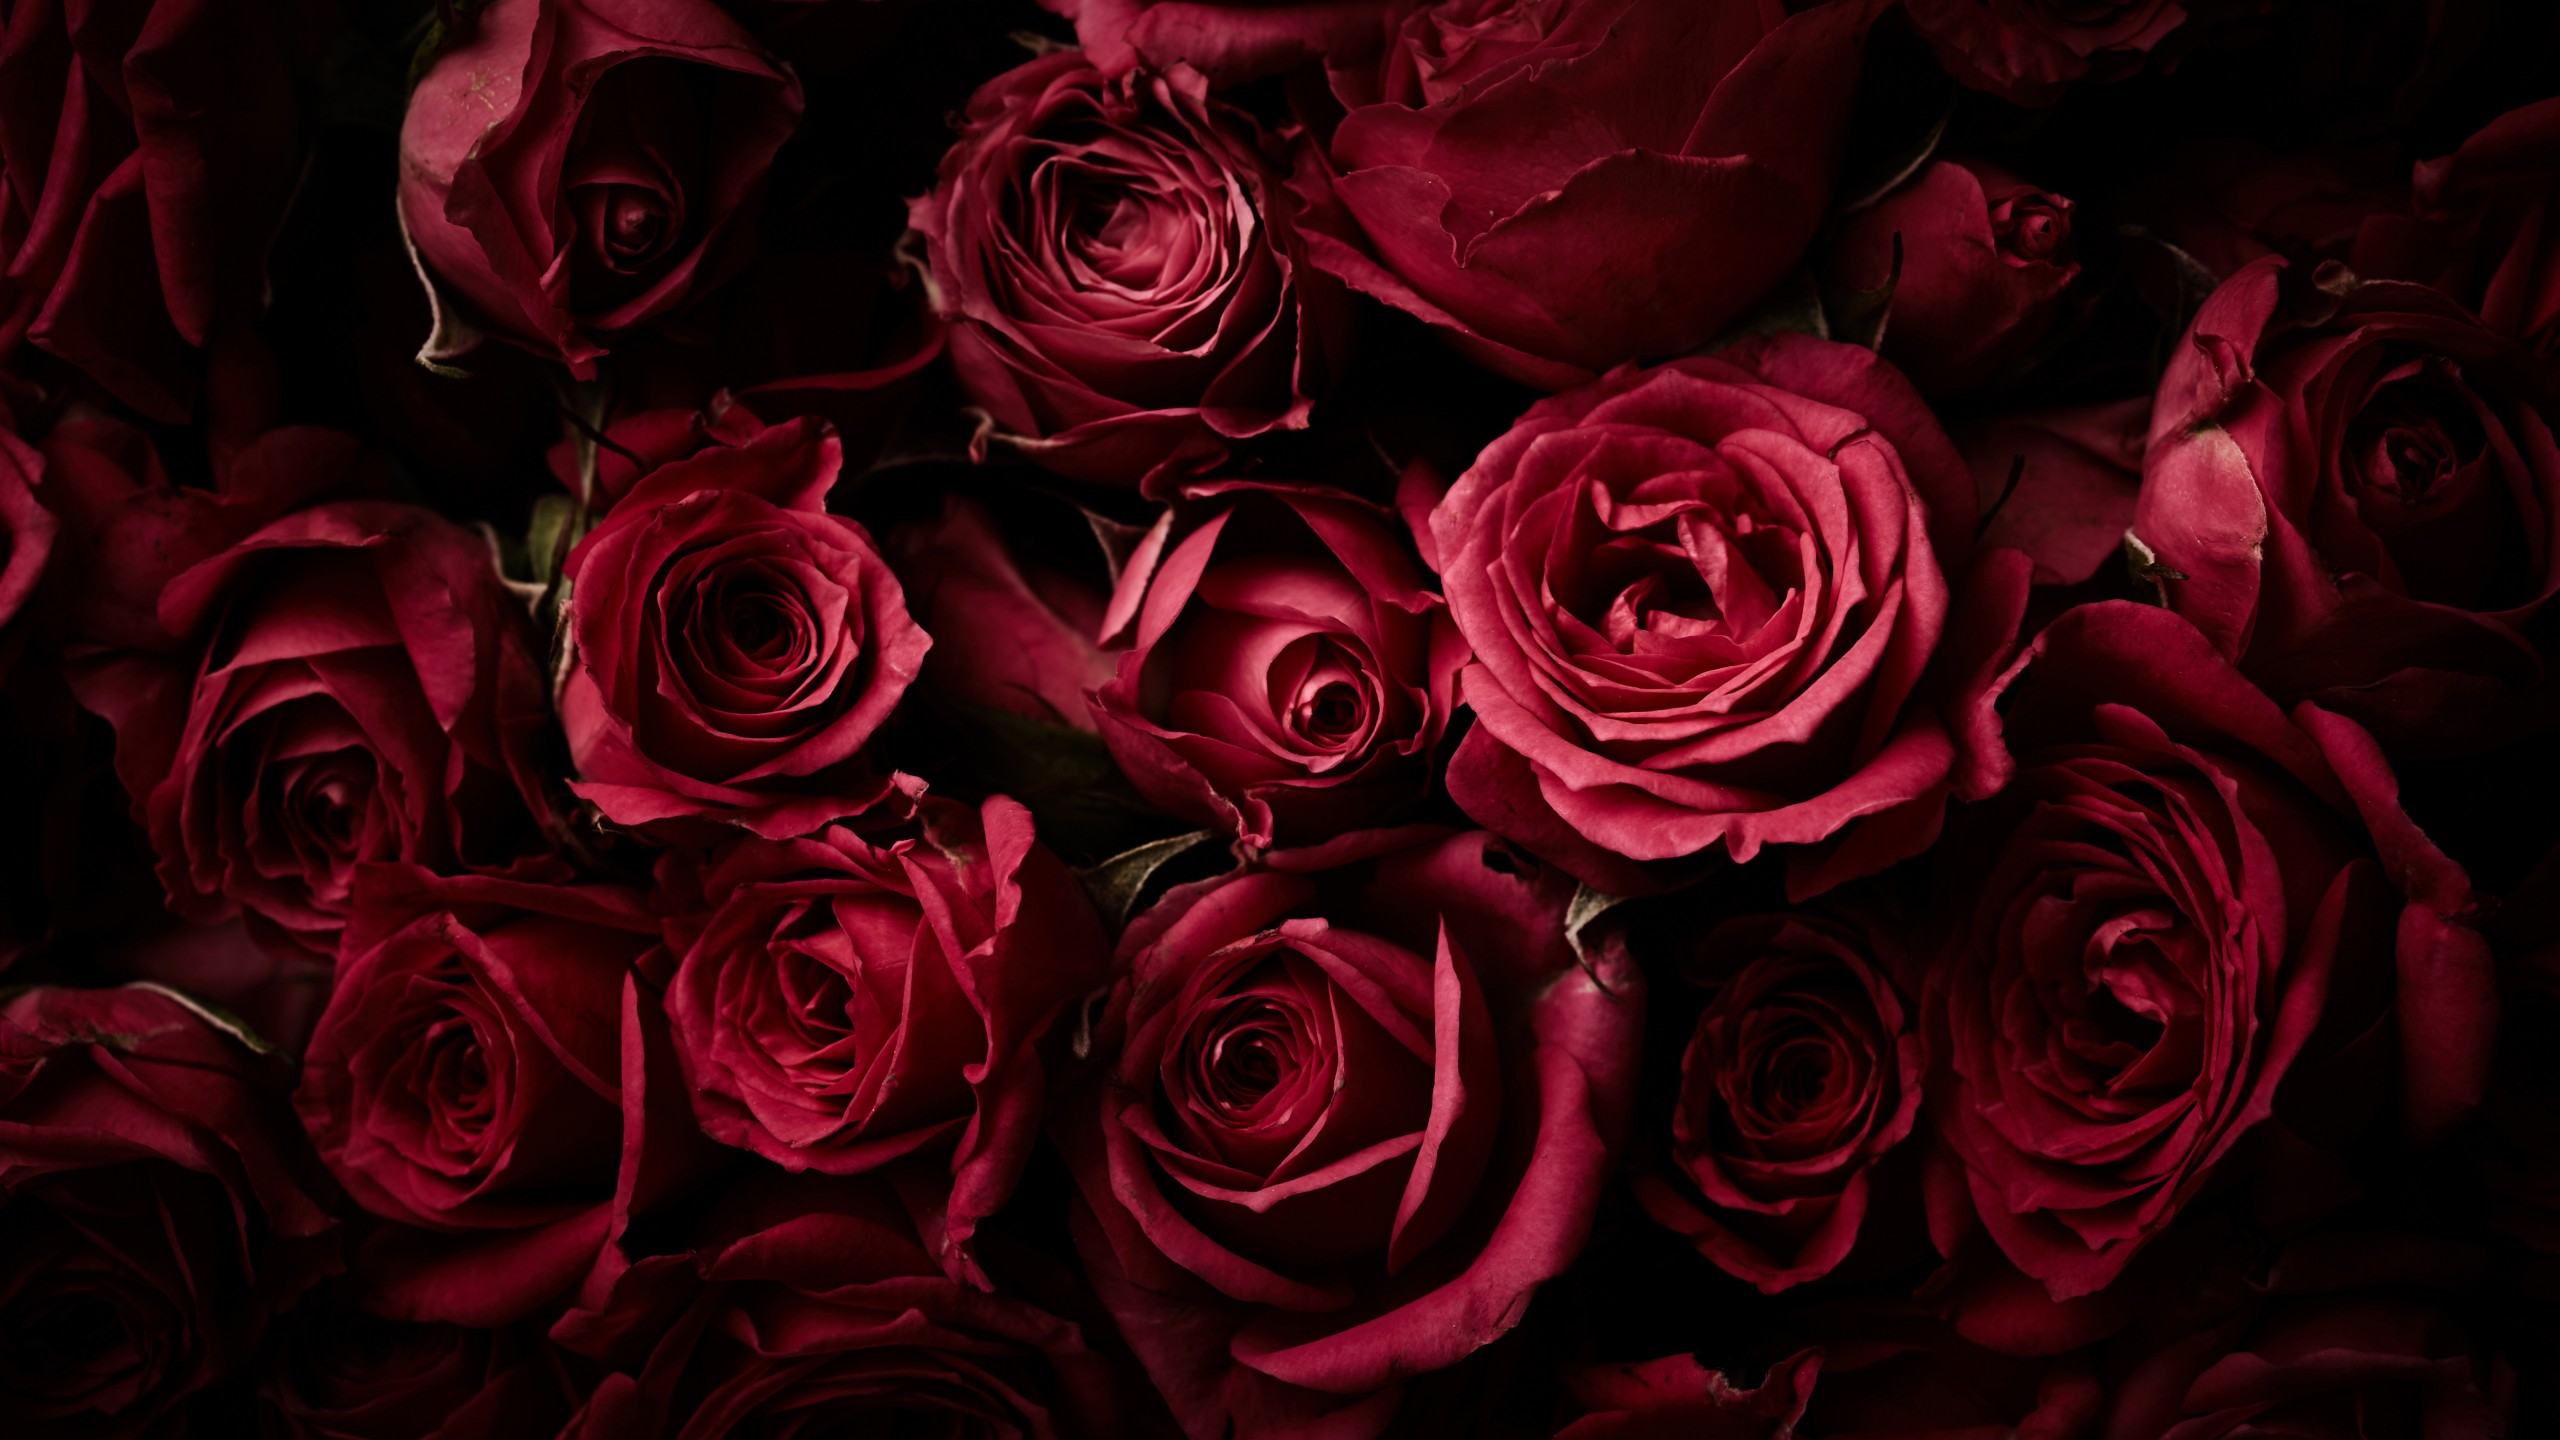 Red Roses Black Background - 2560x1440 Wallpaper 